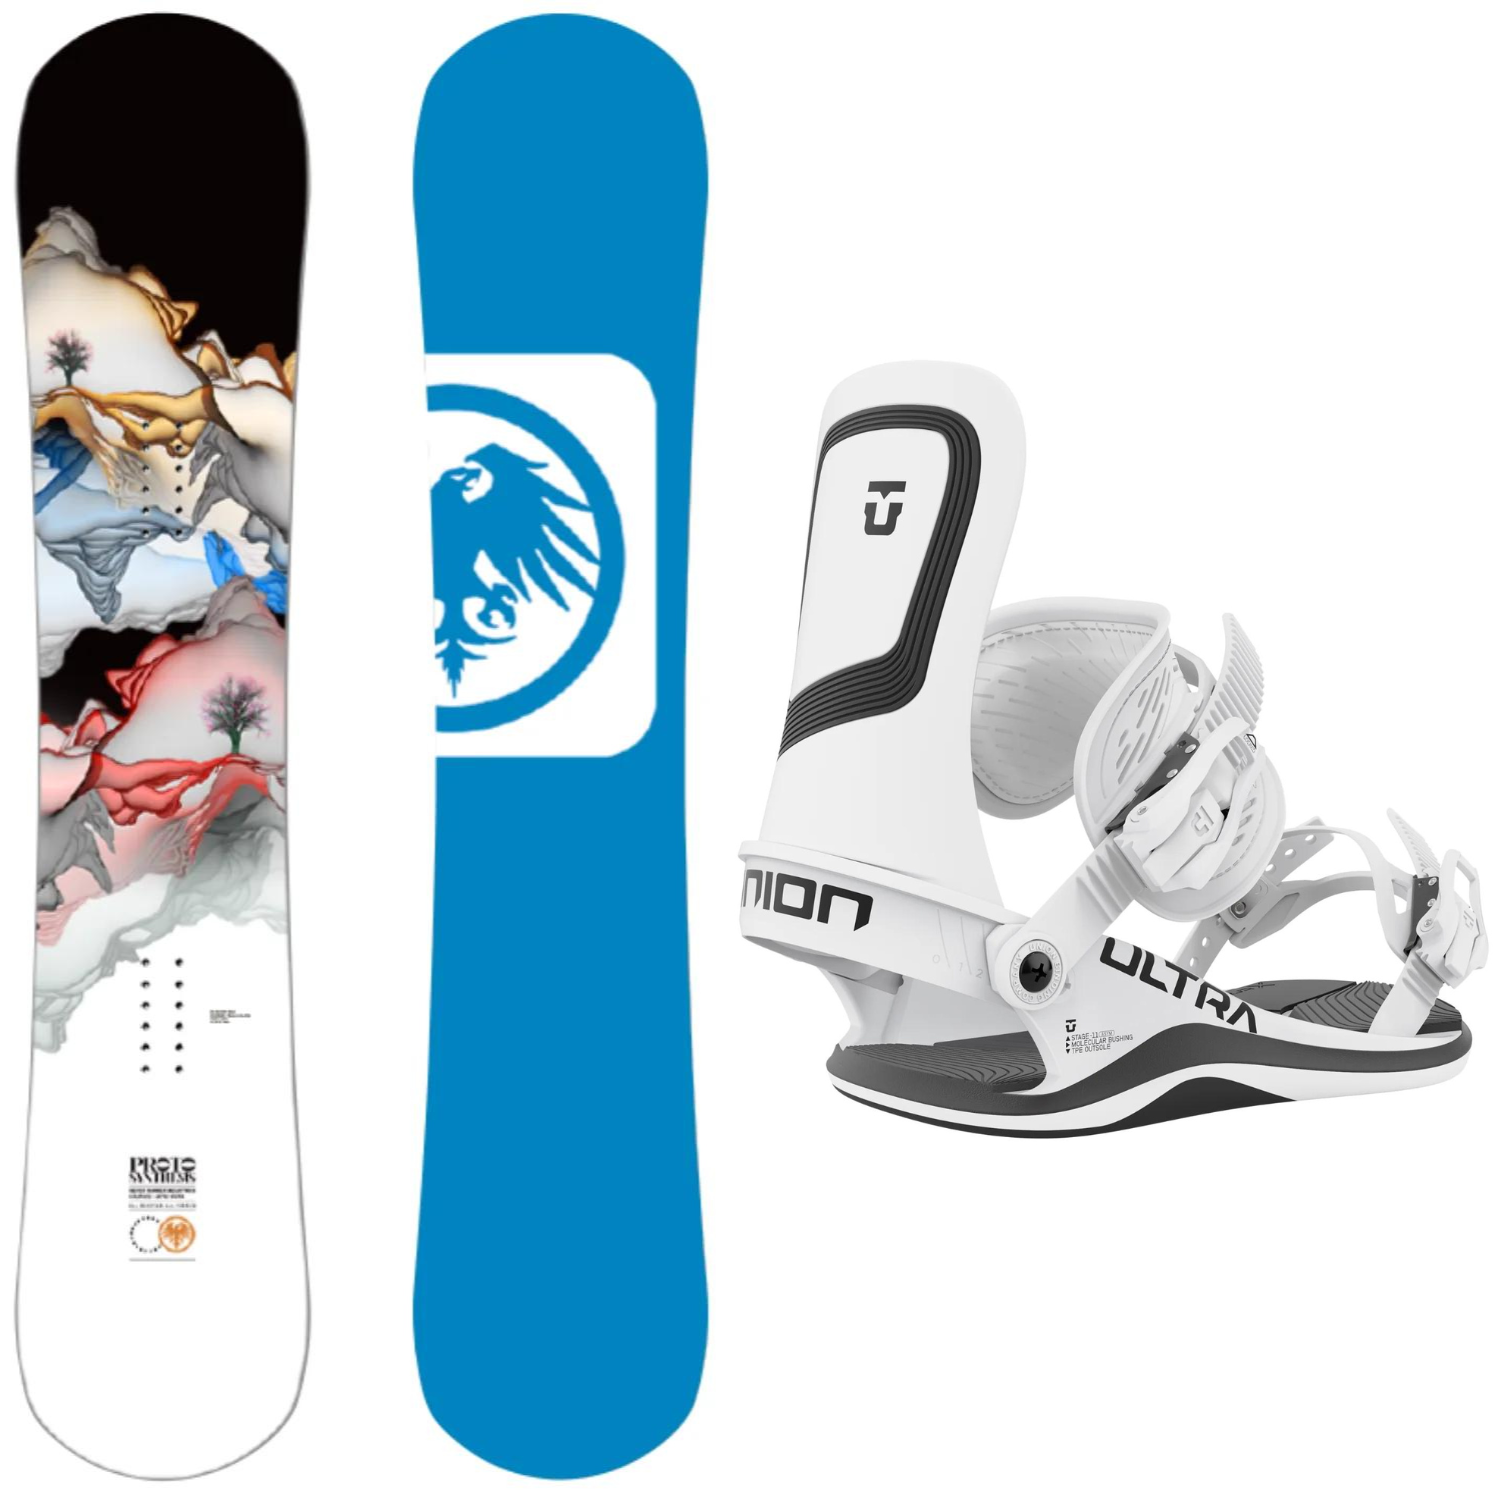 grens Zeebrasem Continent 2023 Never Summer Proto Synthesis Snowboard + Union Ultra Bindings